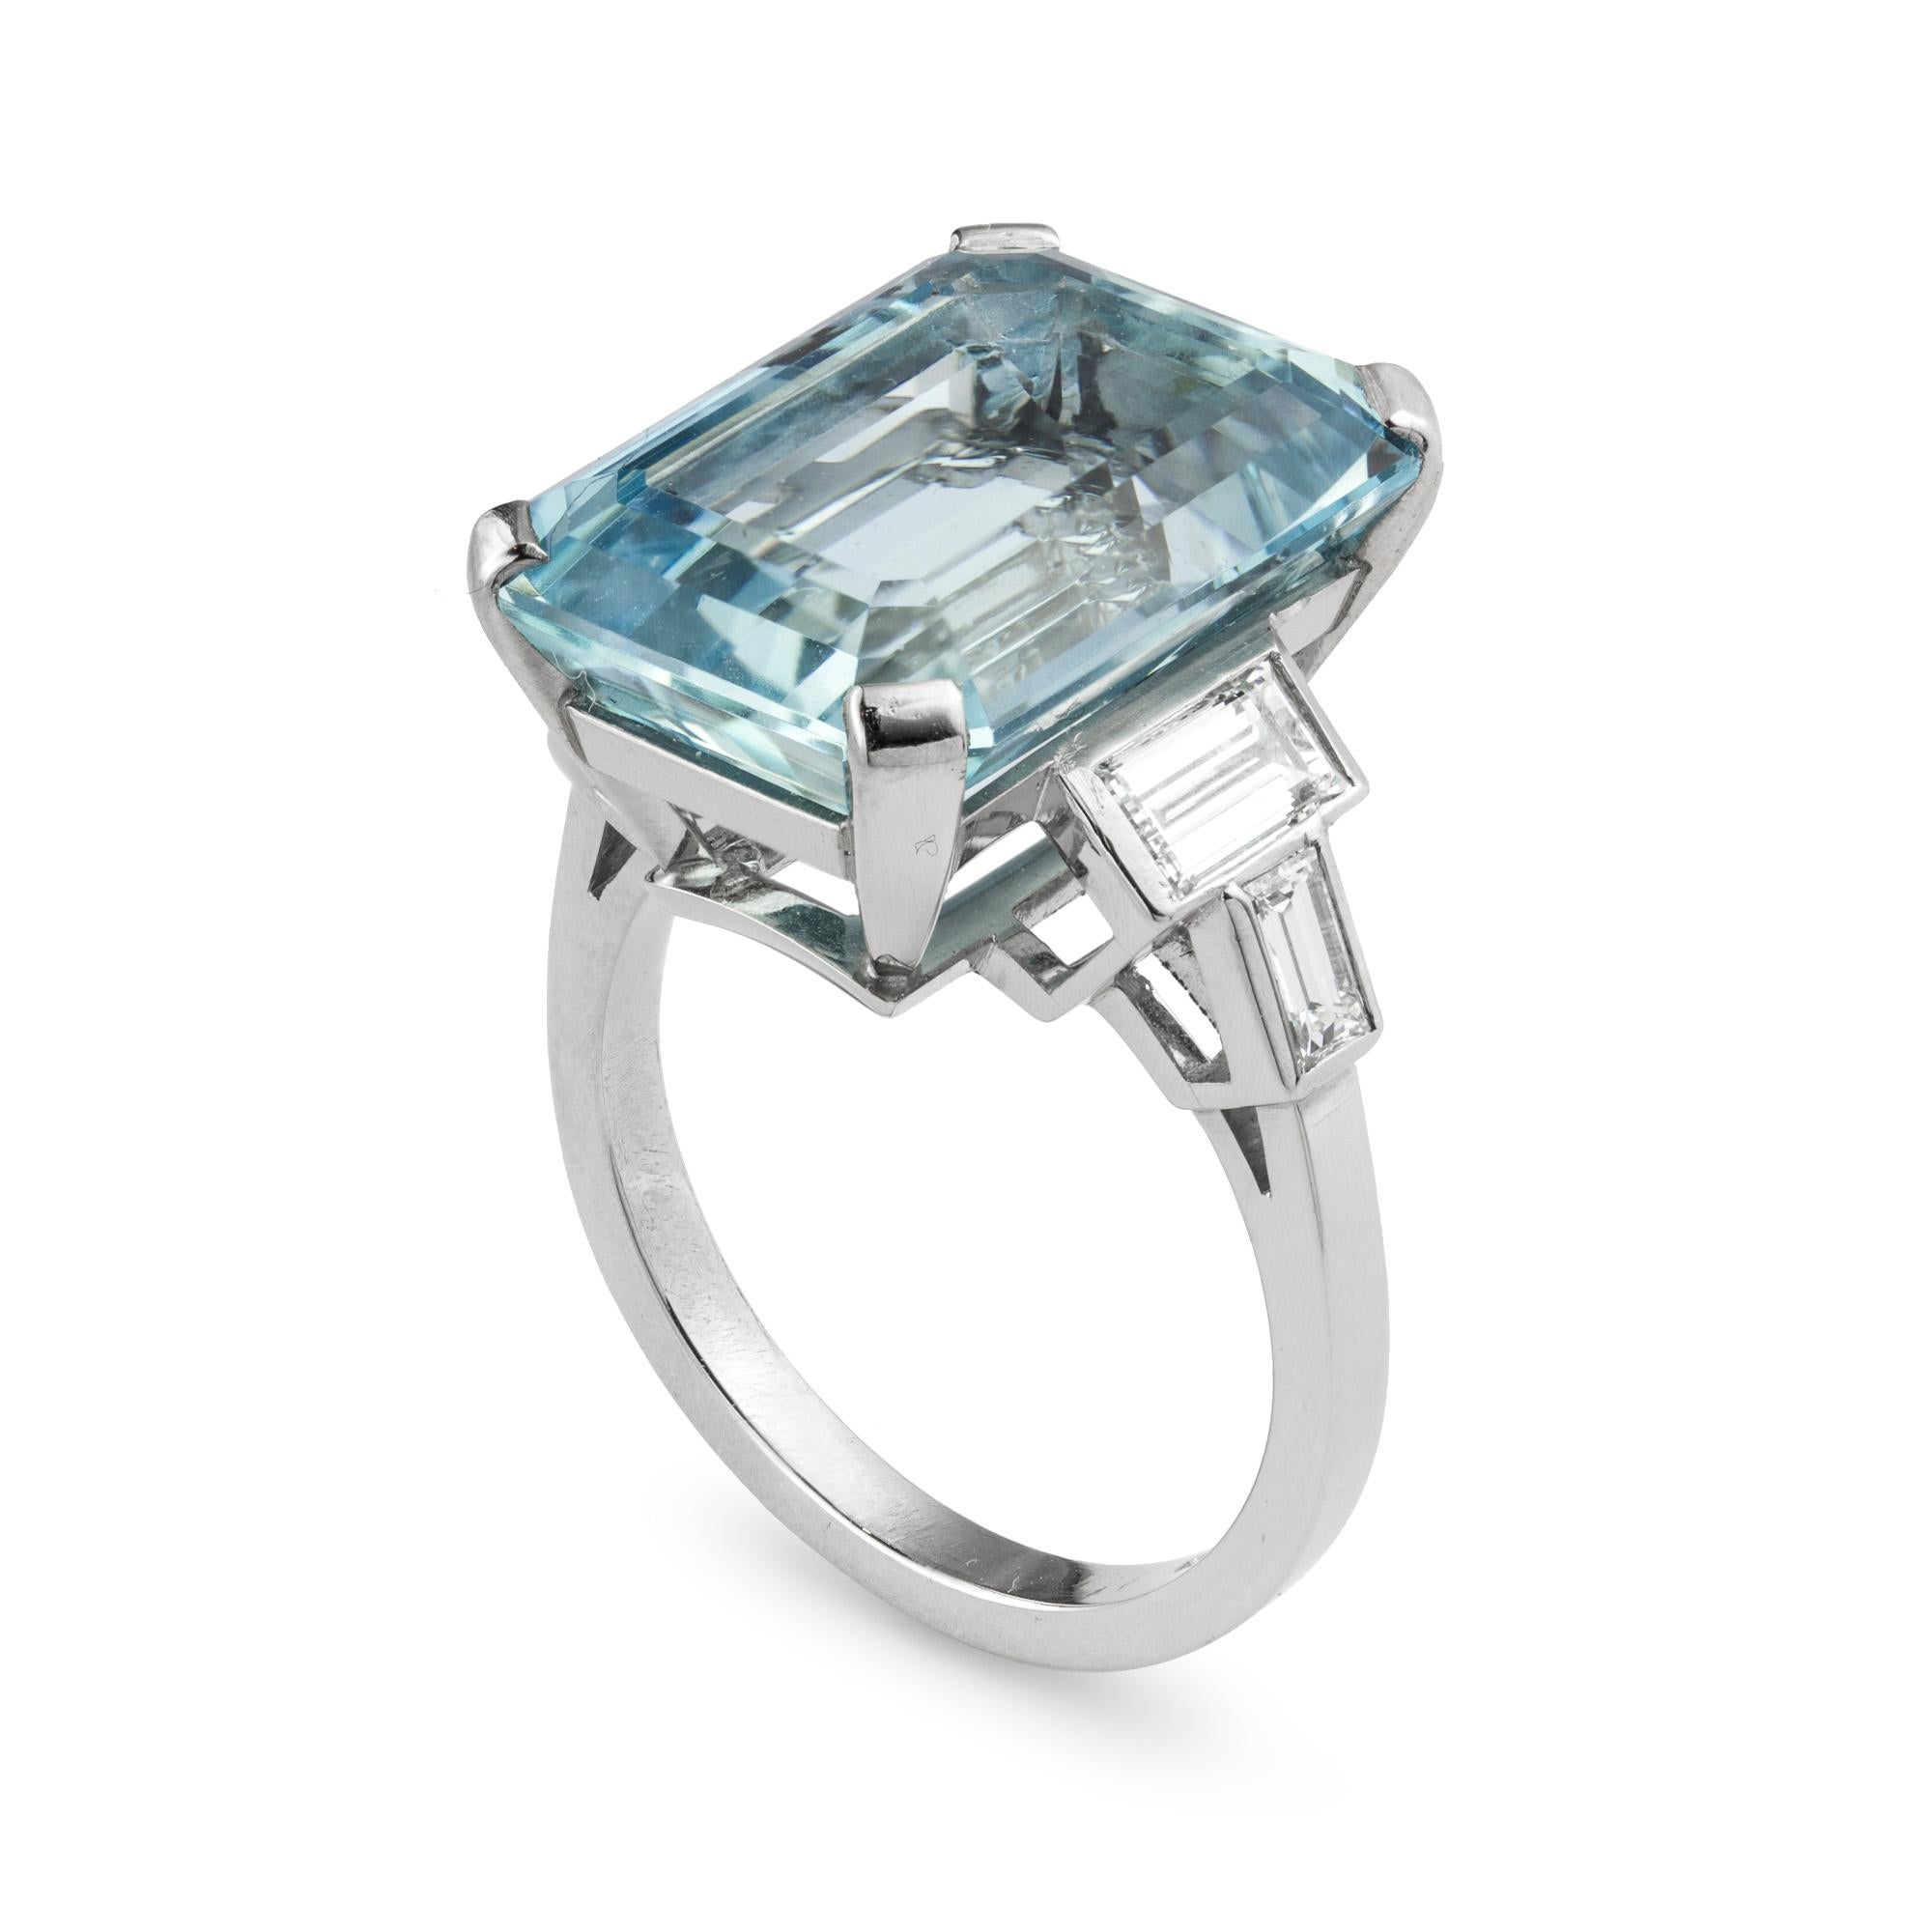 An aquamarine and diamond ring, the emerald-cut aquamarine weighing 12.01 carats, claw-set between baguette diamond-set shoulders, with total diamond weight 0.96 carats, all mounted in platinum, hallmarked platinum, London 2017, made by Bentley &